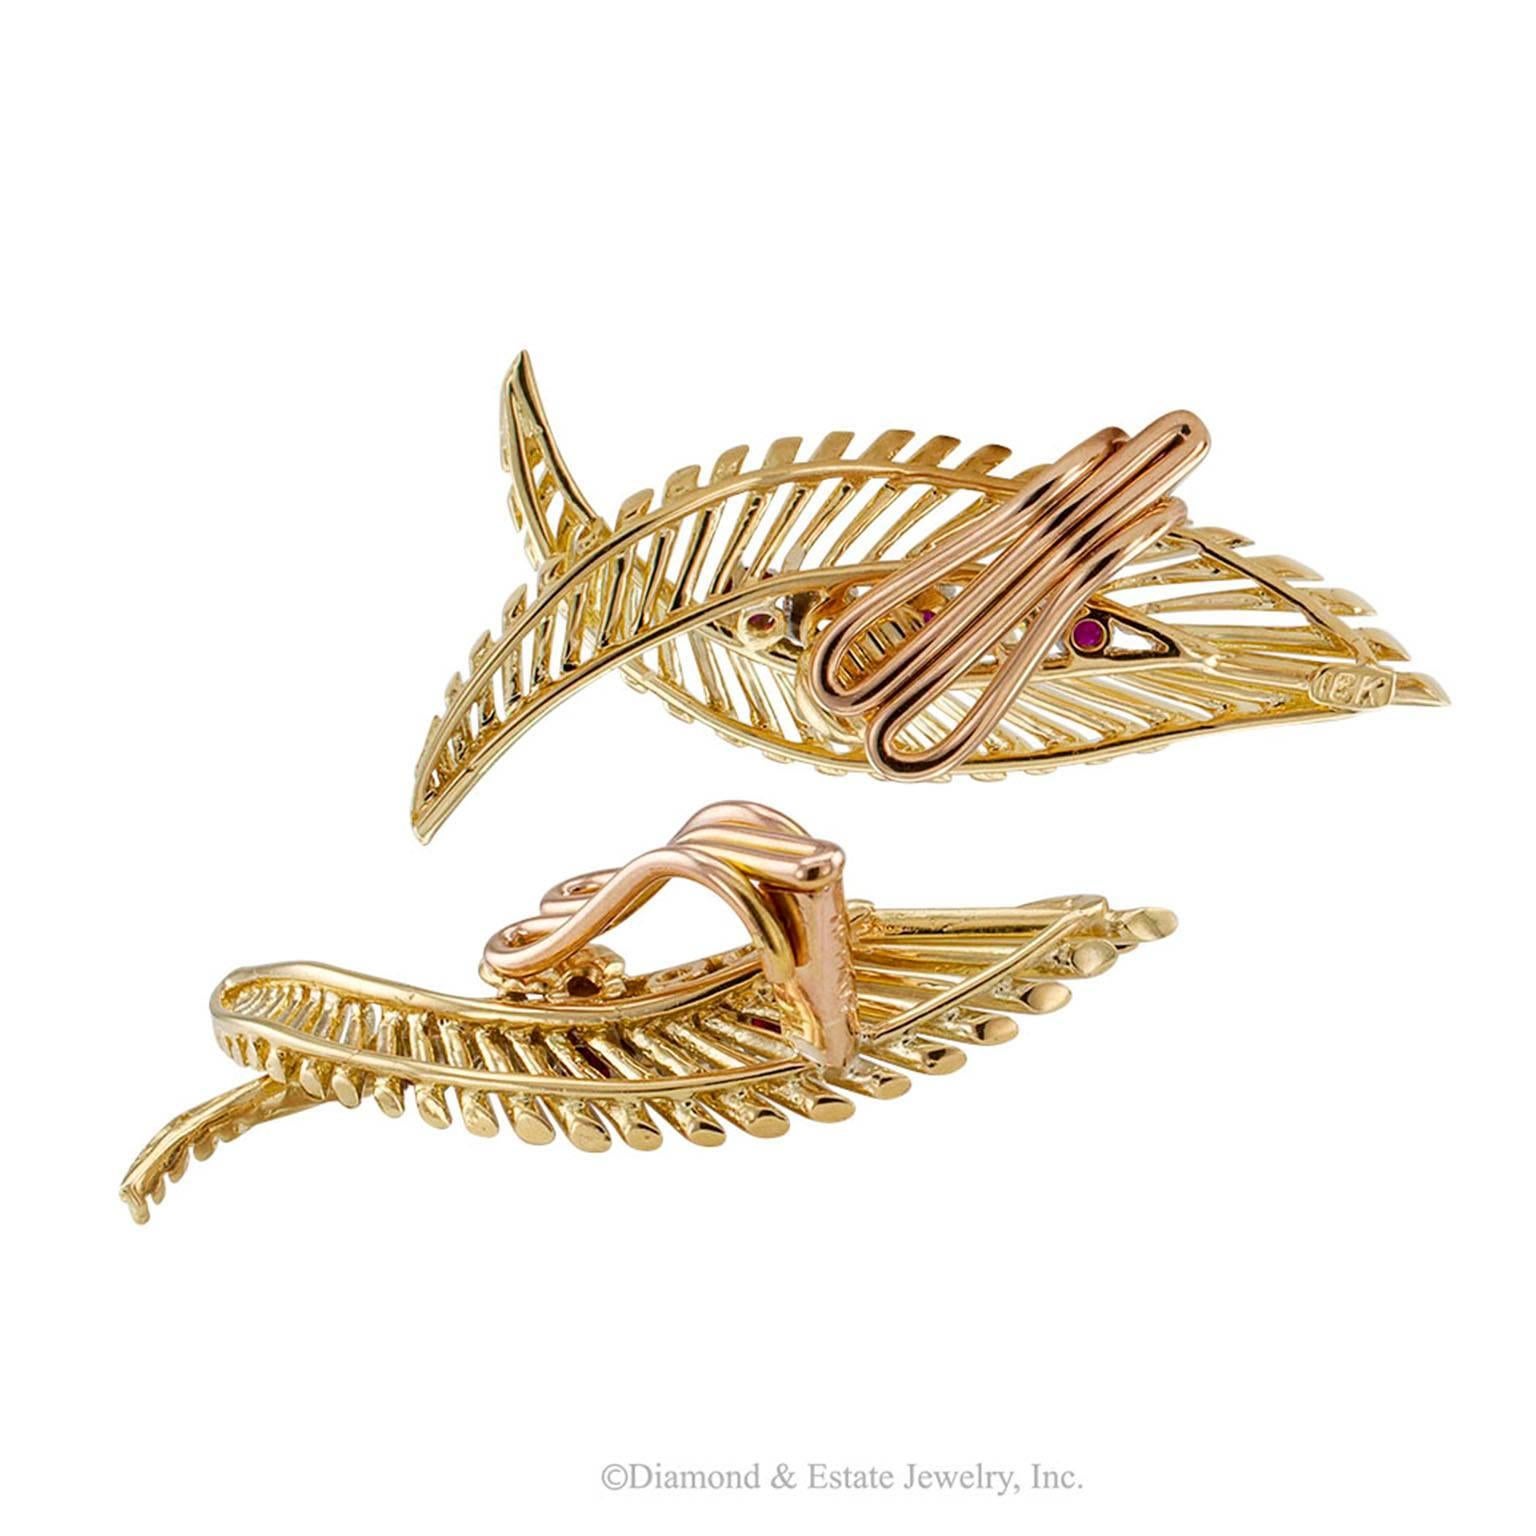 Tiffany & Co 1950s Ruby Diamond Gold Retro Ear Clips

Tiffany & Co 1950s ruby and diamond retro gold ear clips.  Matching left and right designs  styled as abstract  leaf motifs entirely handcrafted in 18-karat gold featuring graduating filaments